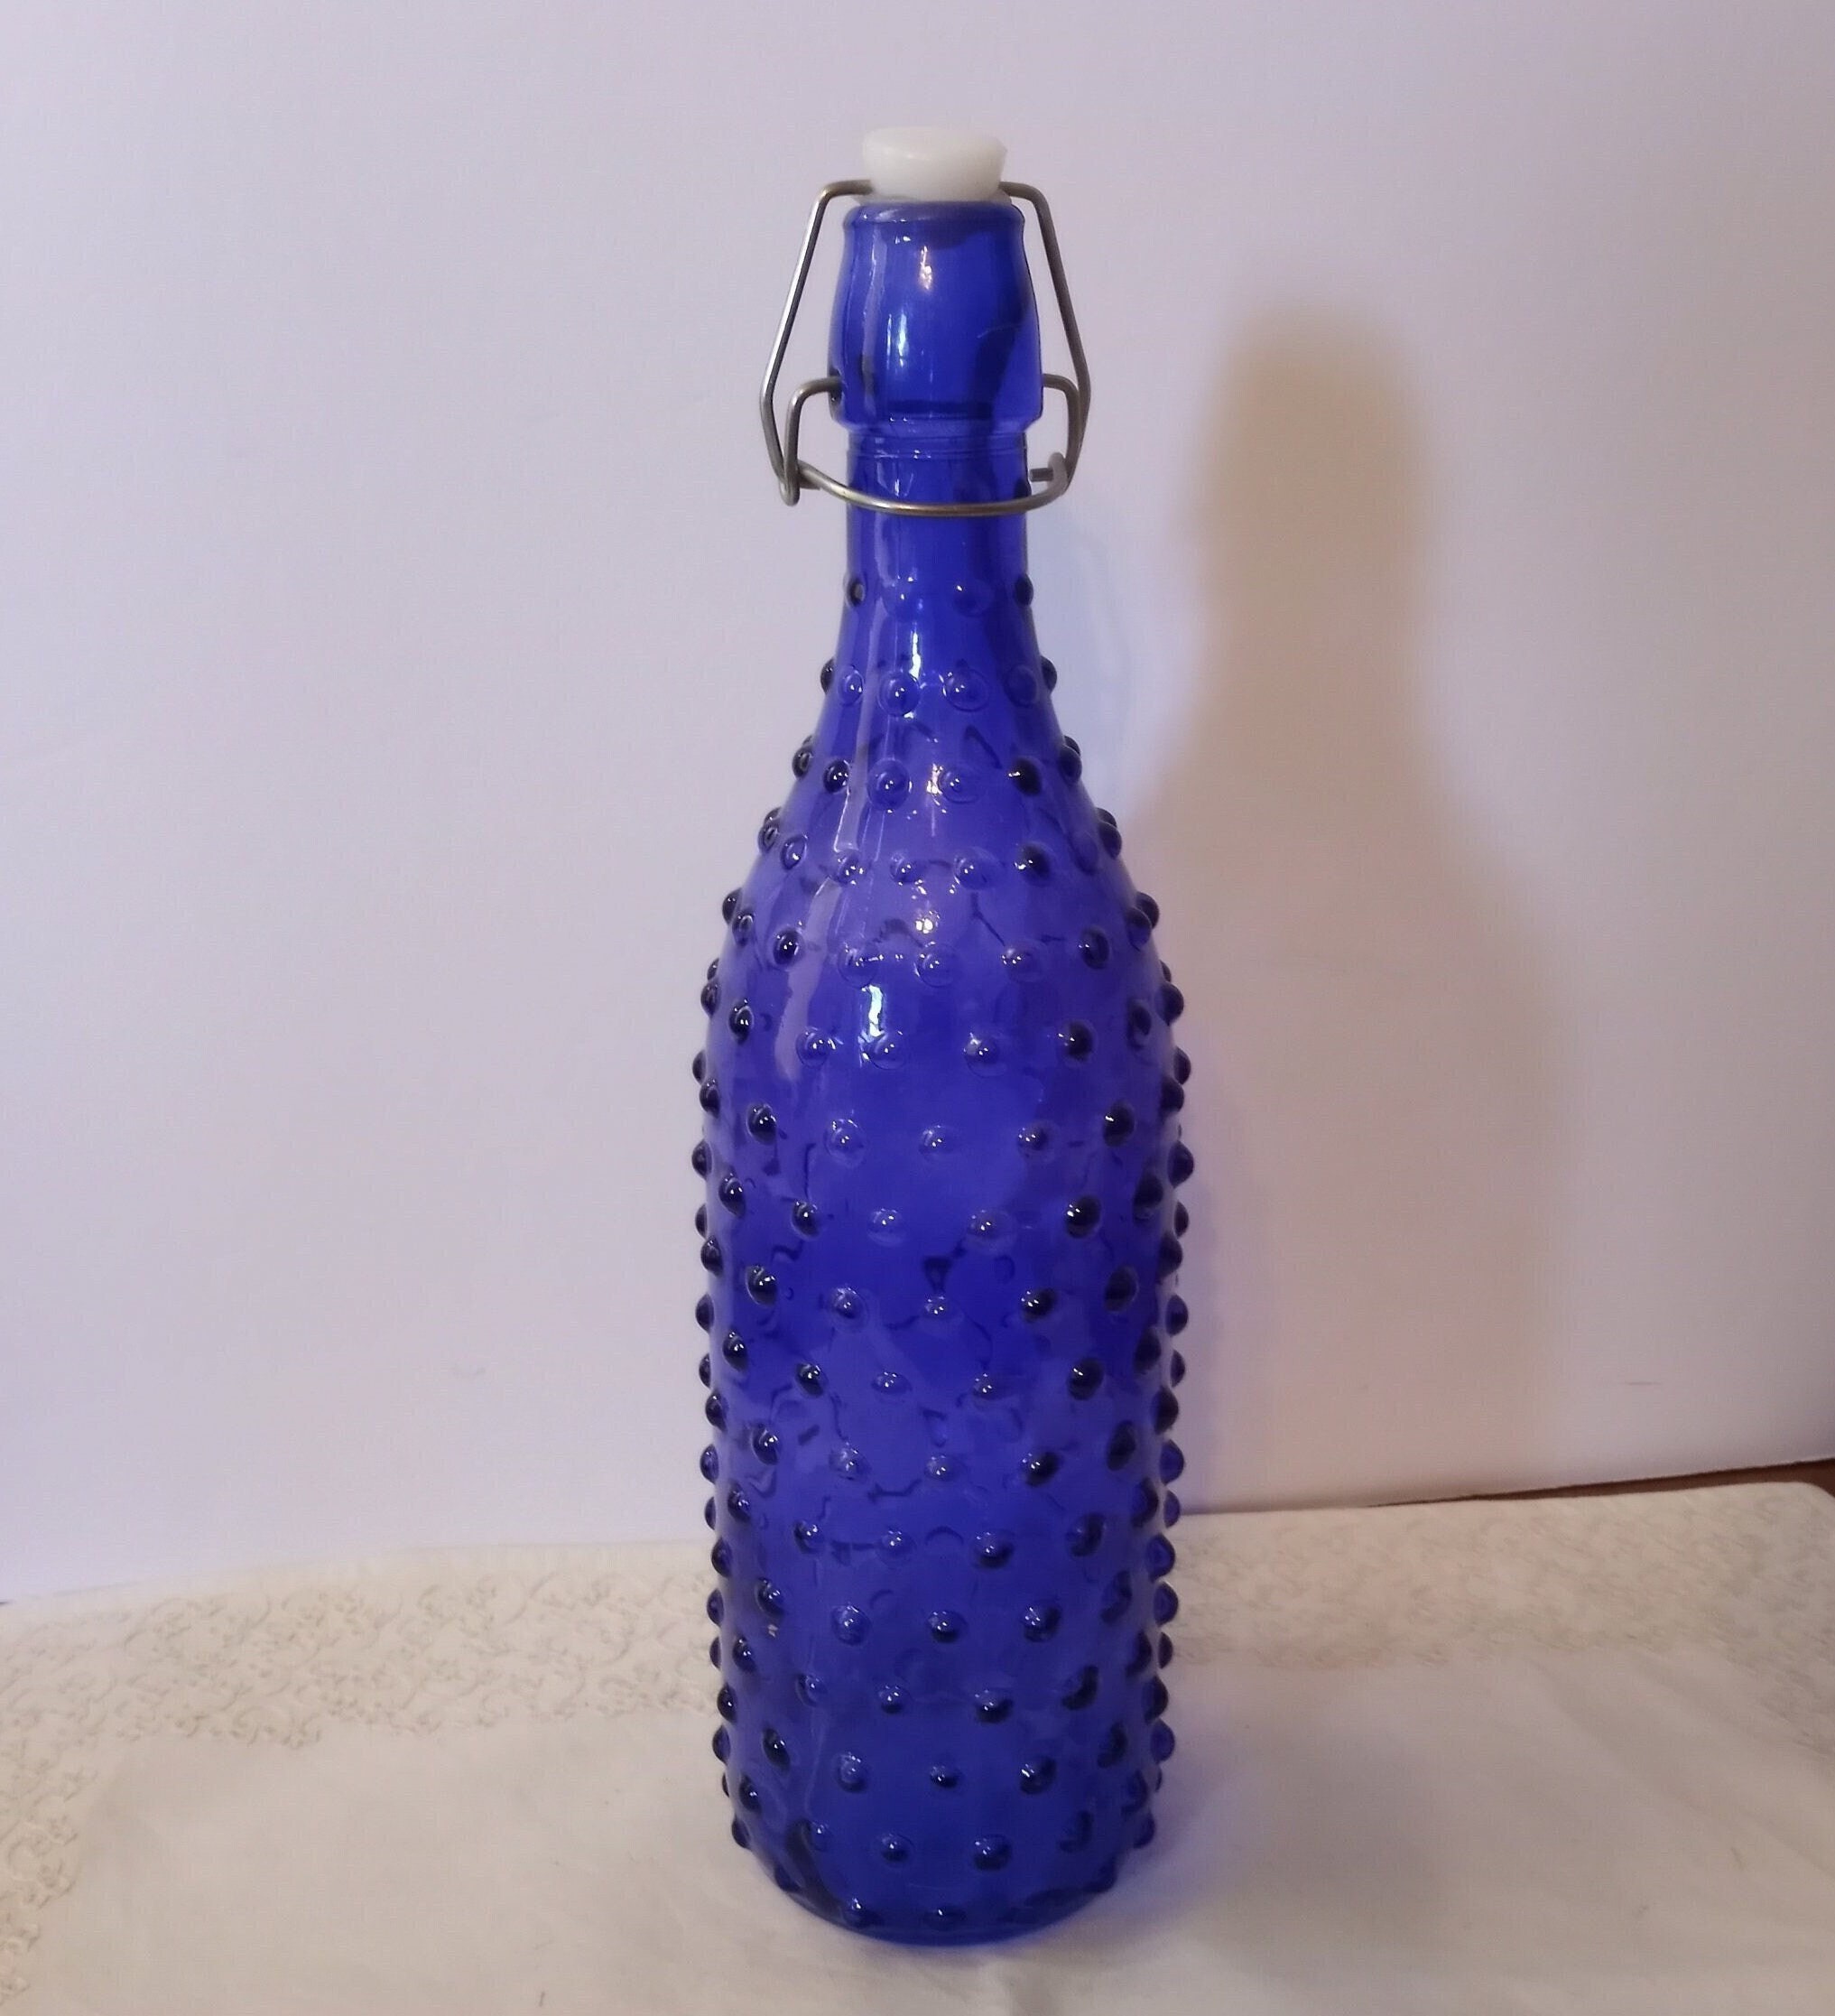 Traditional Fluted 1-litre Glass Bottle with Ceramic Swing Stopper